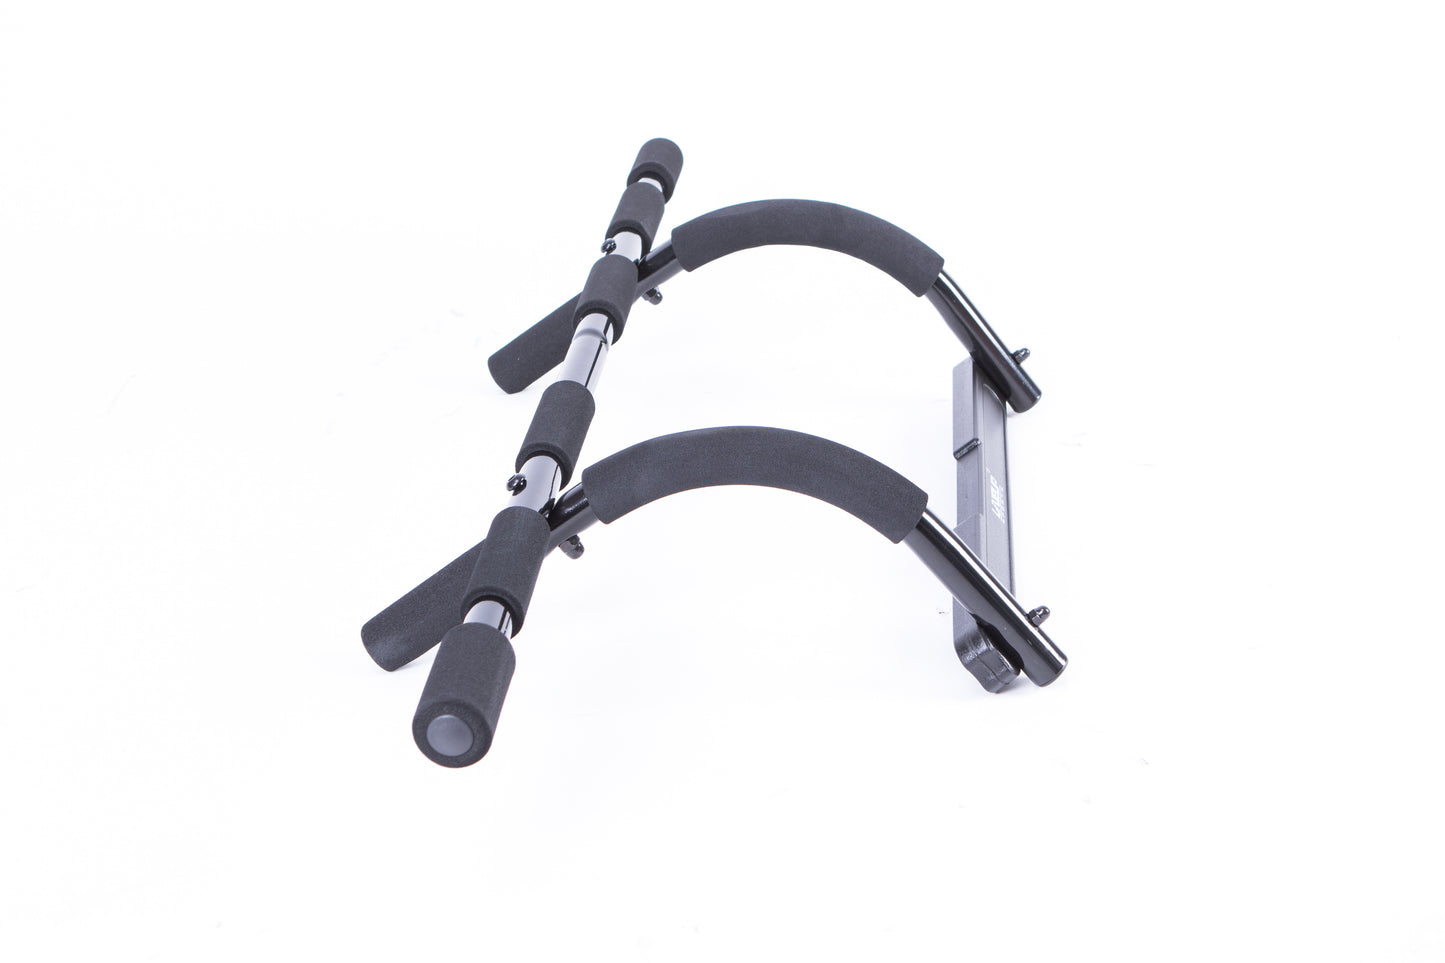 Liveup Pullup Bar with Arm Strap